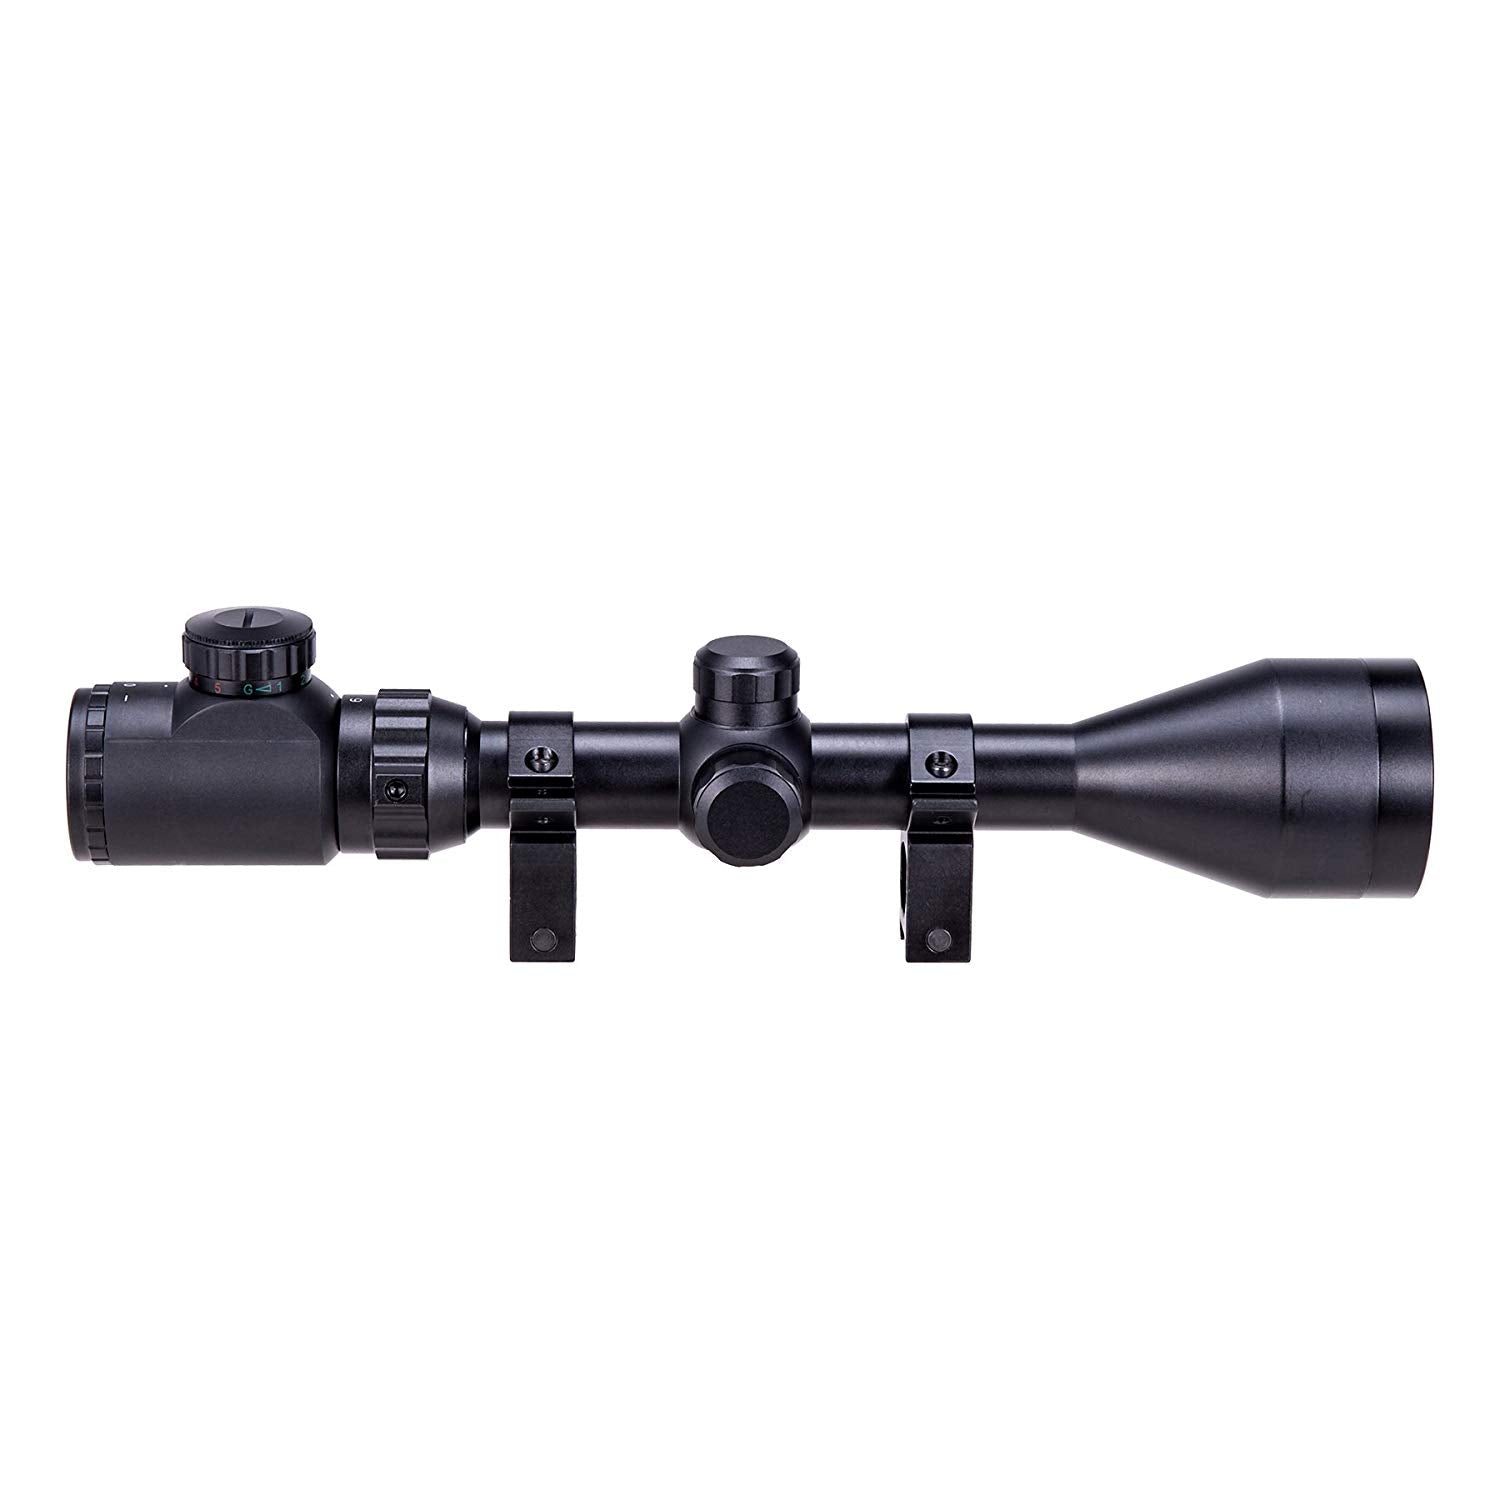 Pinty 3-9x50mm Red/Green Rangefinder Hunting Rifle Scope